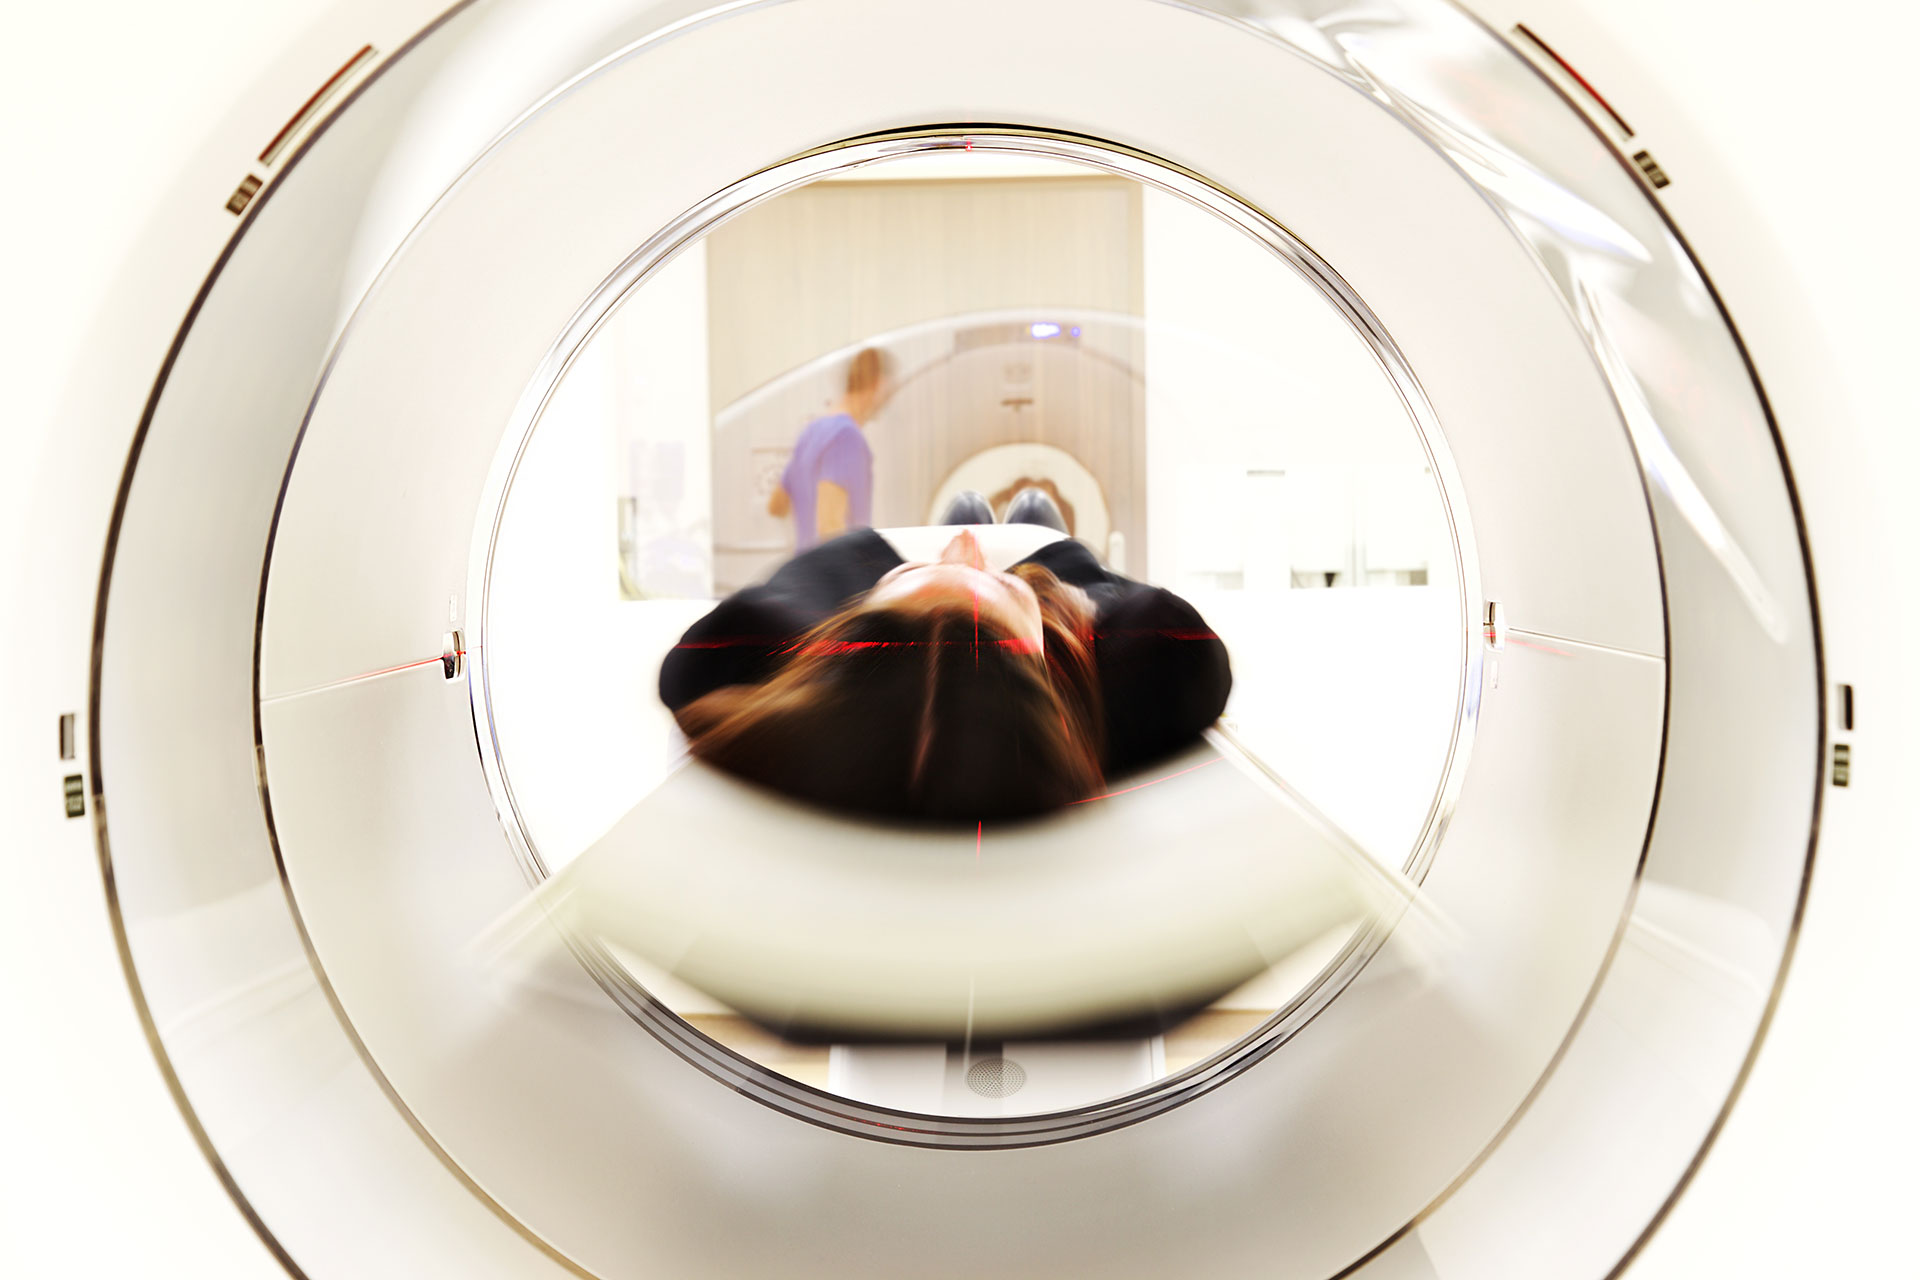 Integra Medical Imaging | MRI Services, MRI Leasing/Rental and On-Site Mobile MRI Services